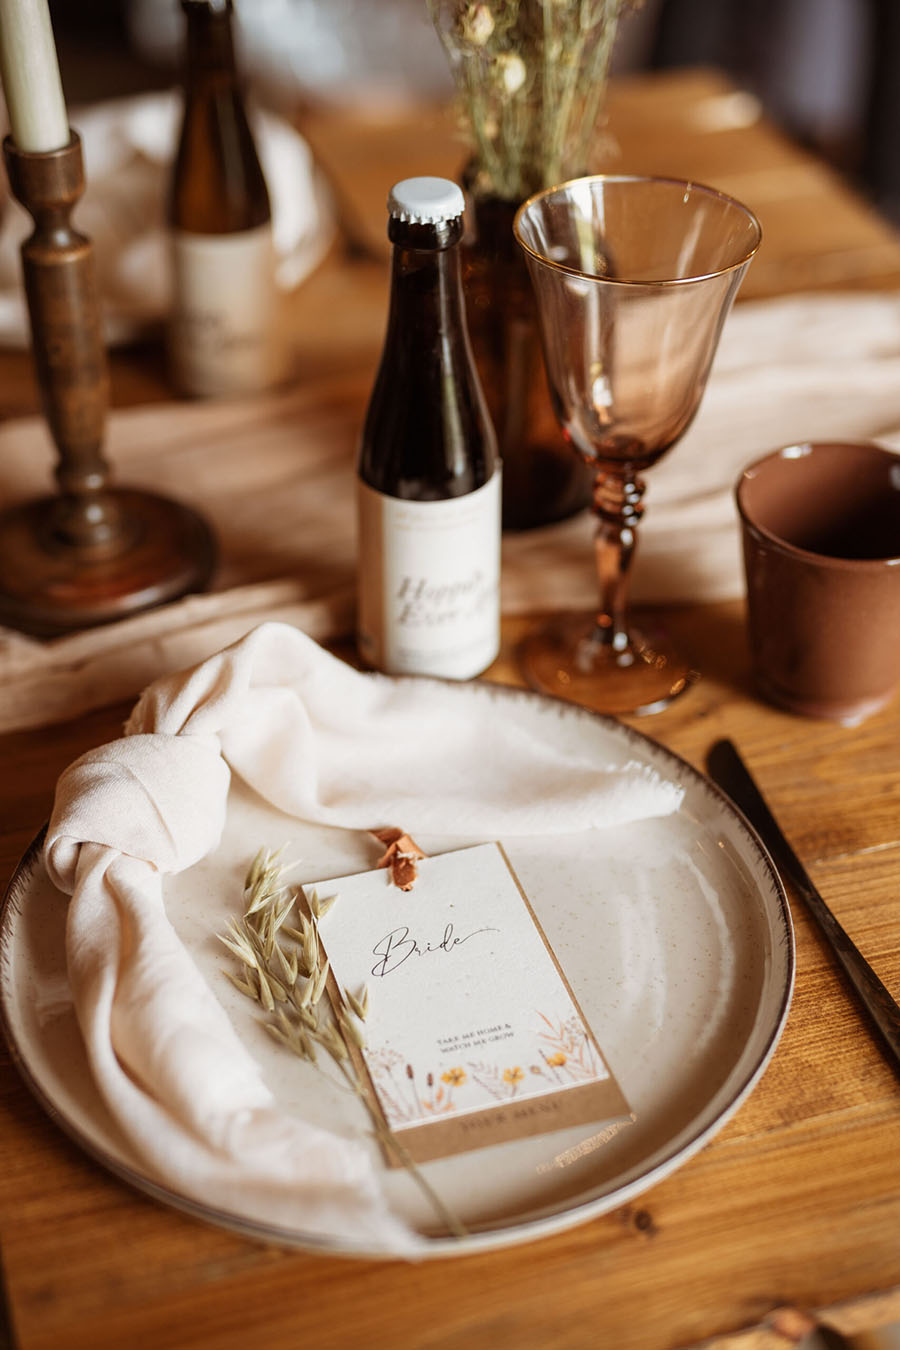 A wedding place setting on a wooden table. A plate with a knotted napkin and place name card, with a brown glass bottle and smoky brown wine glass. Photographer credit Sarah Hoyle, styling by Amethyst Weddings